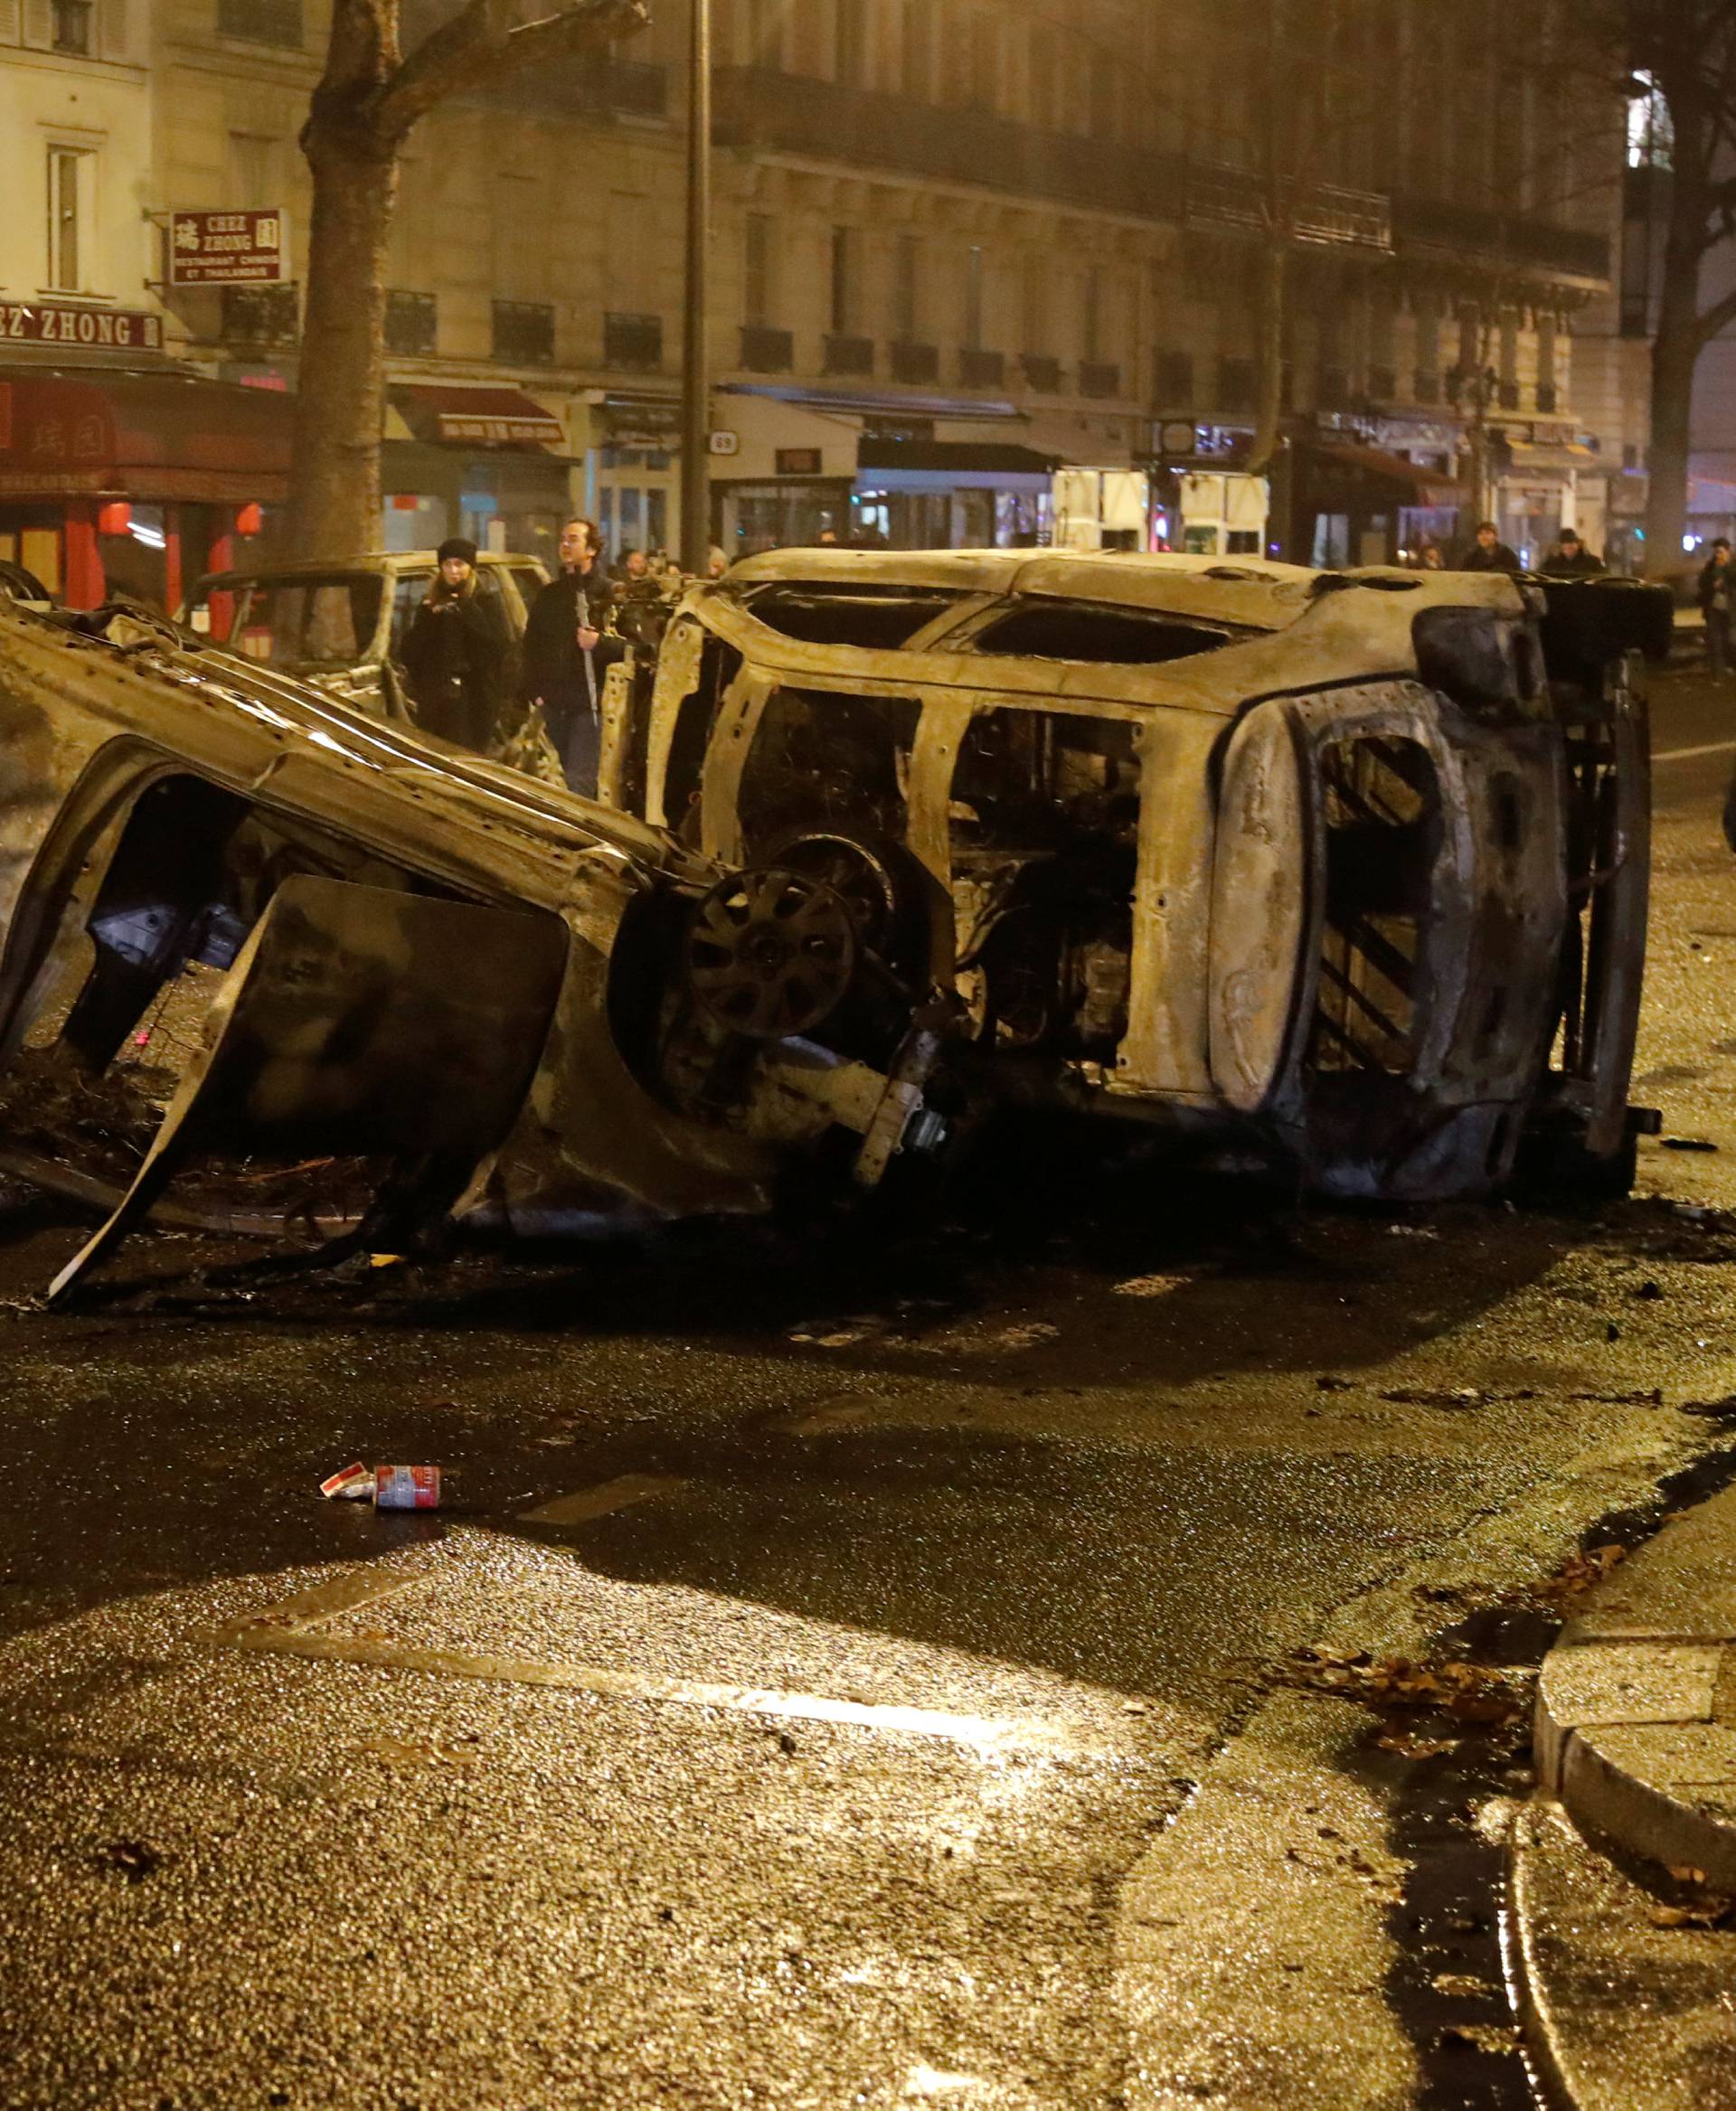 Burned cars are seen on avenue Kleber after clashes with protesters wearing yellow vests, a symbol of a French drivers' protest against higher diesel taxes, in Paris